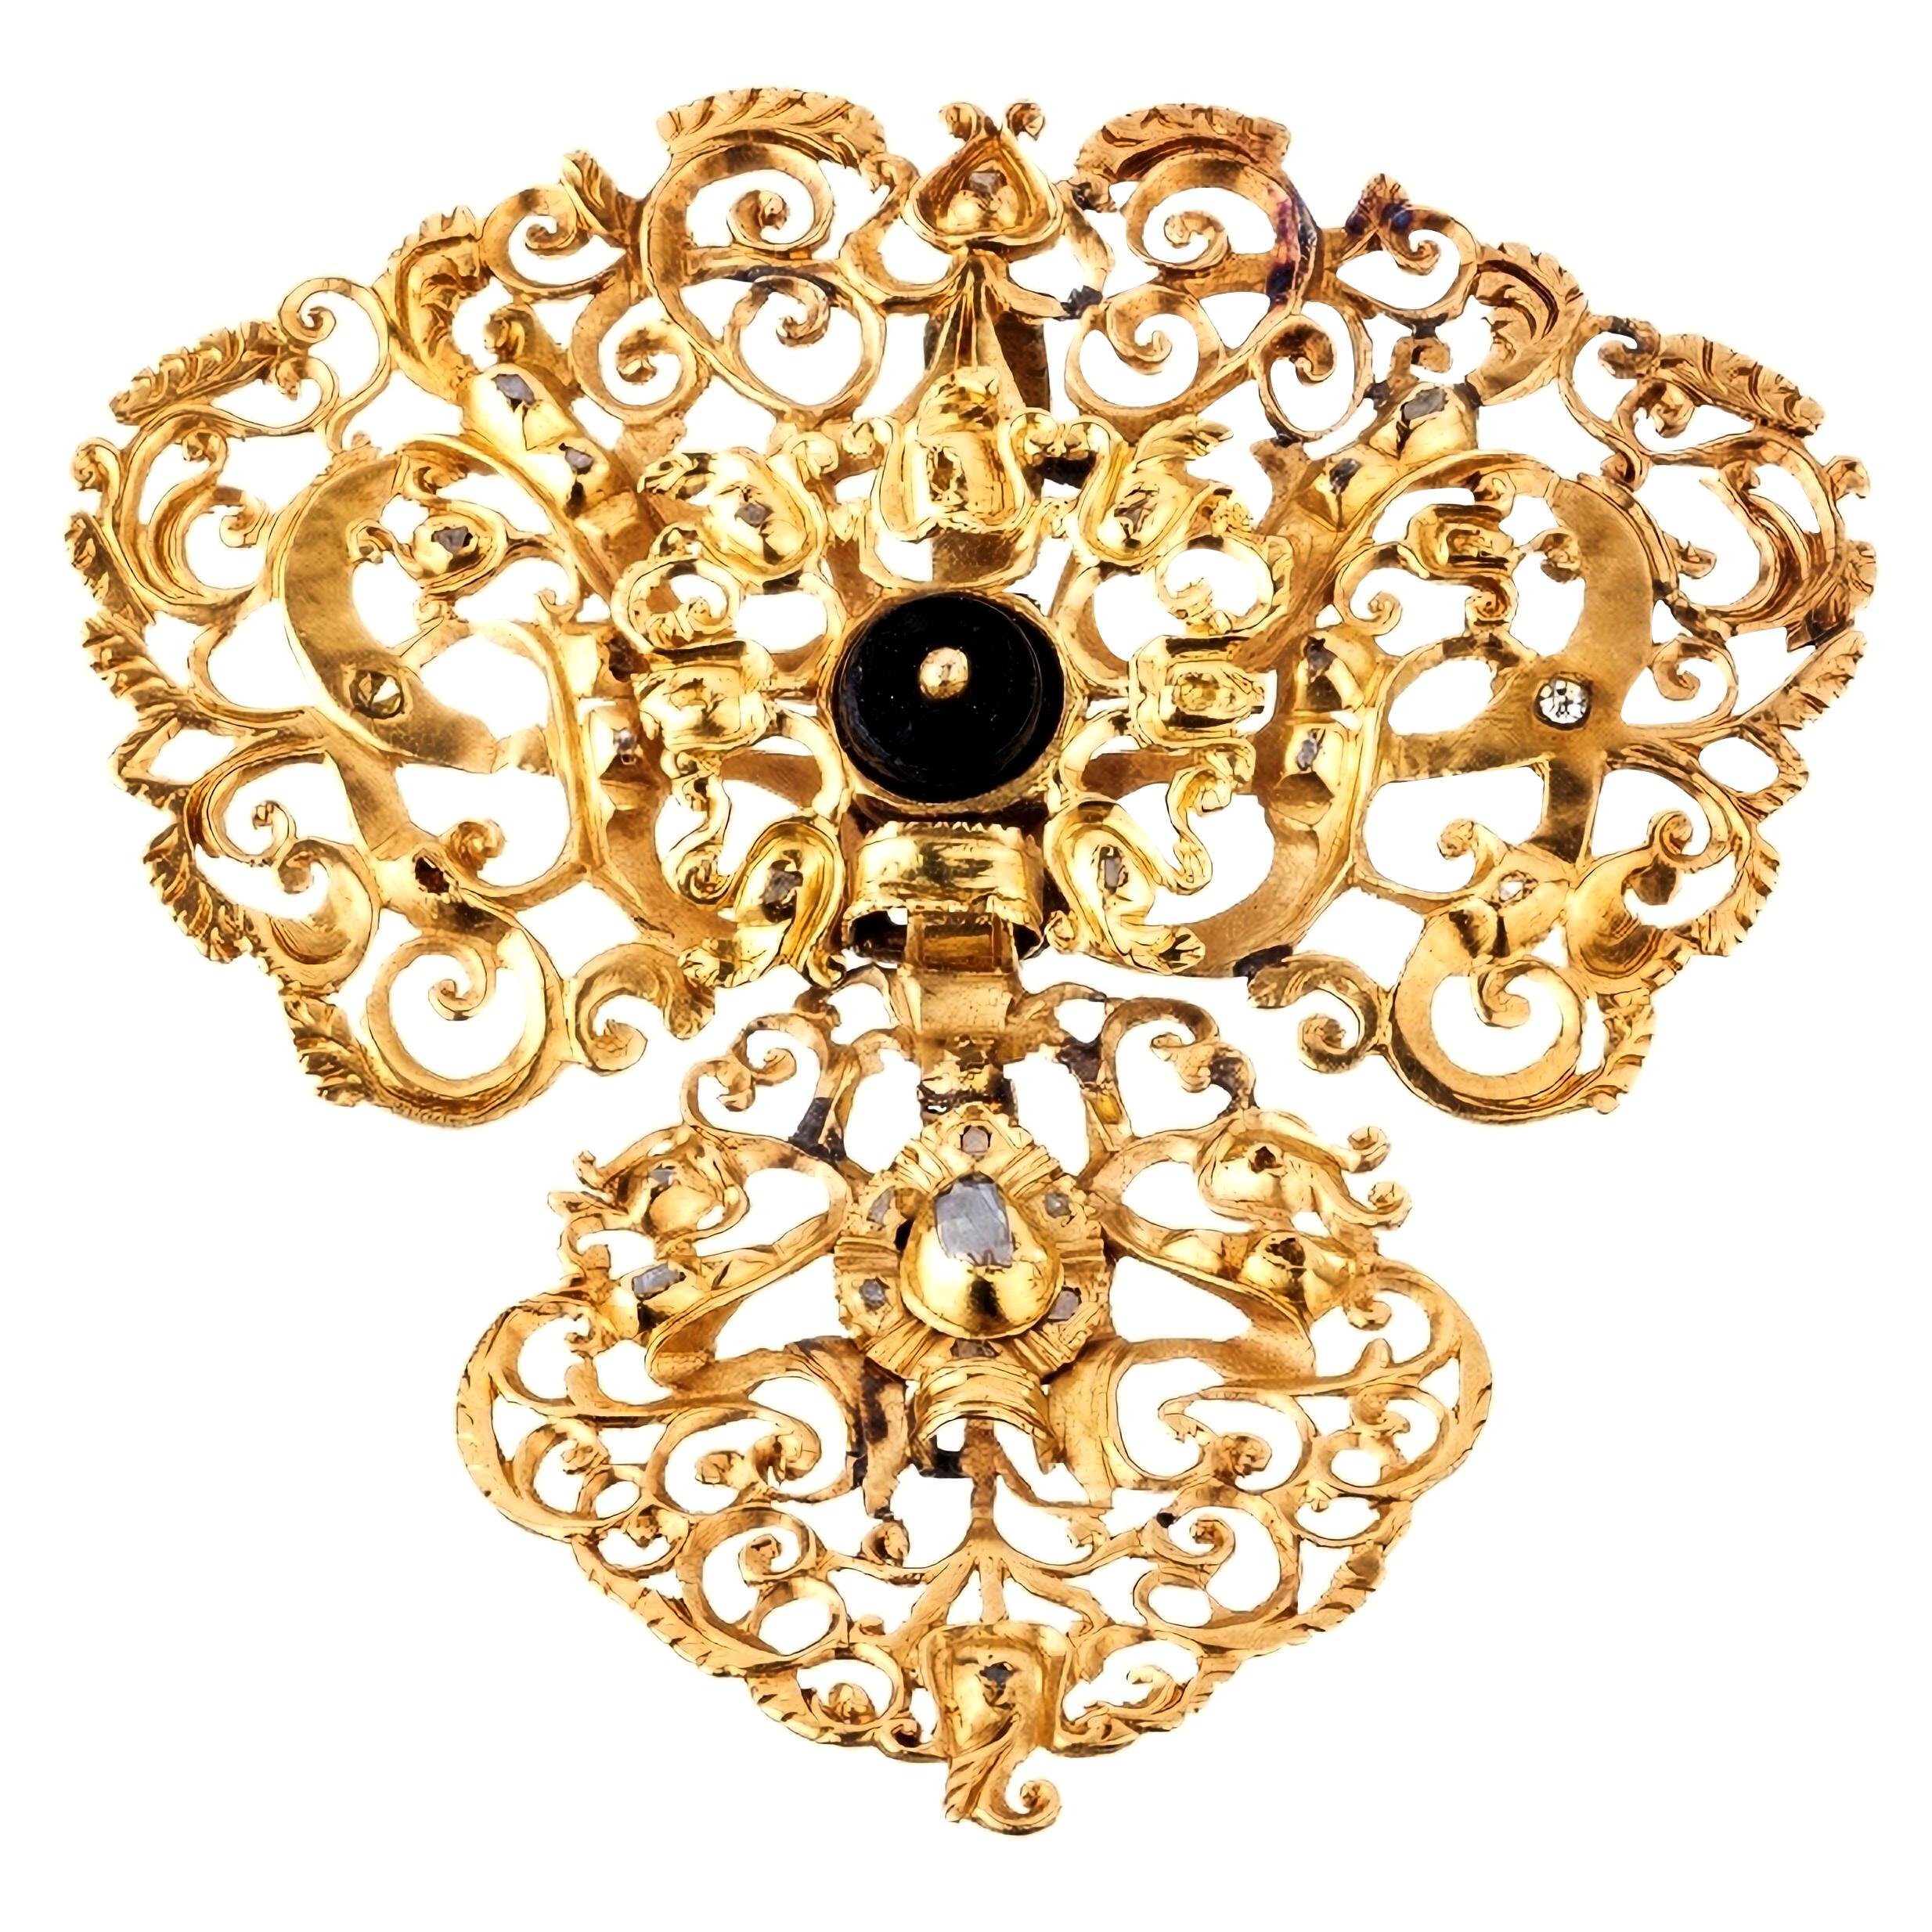 Spanish Gold and Diamonds Lace Pendant from the 18th Century